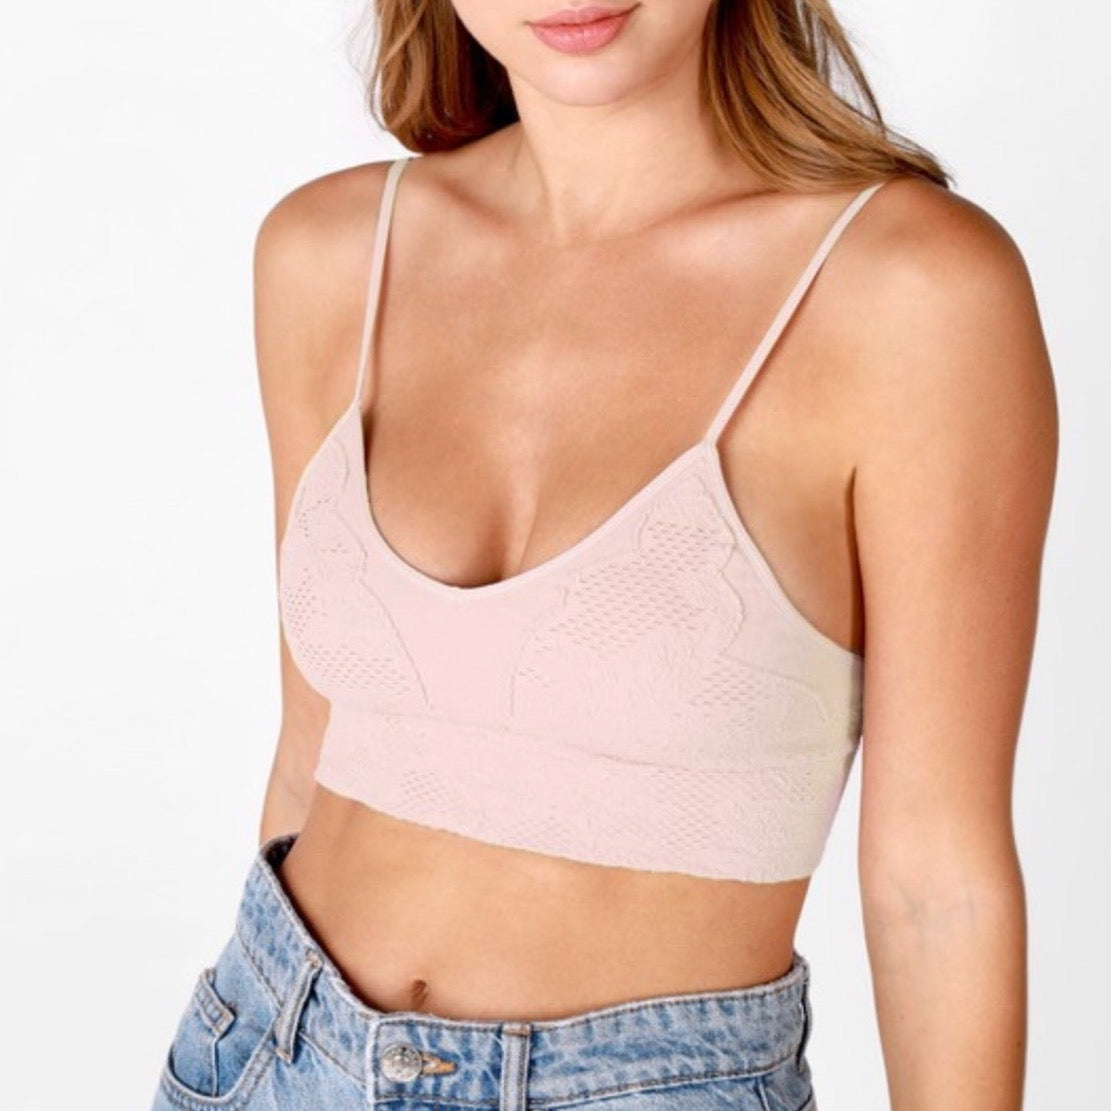 Lace Embroidered Bralette